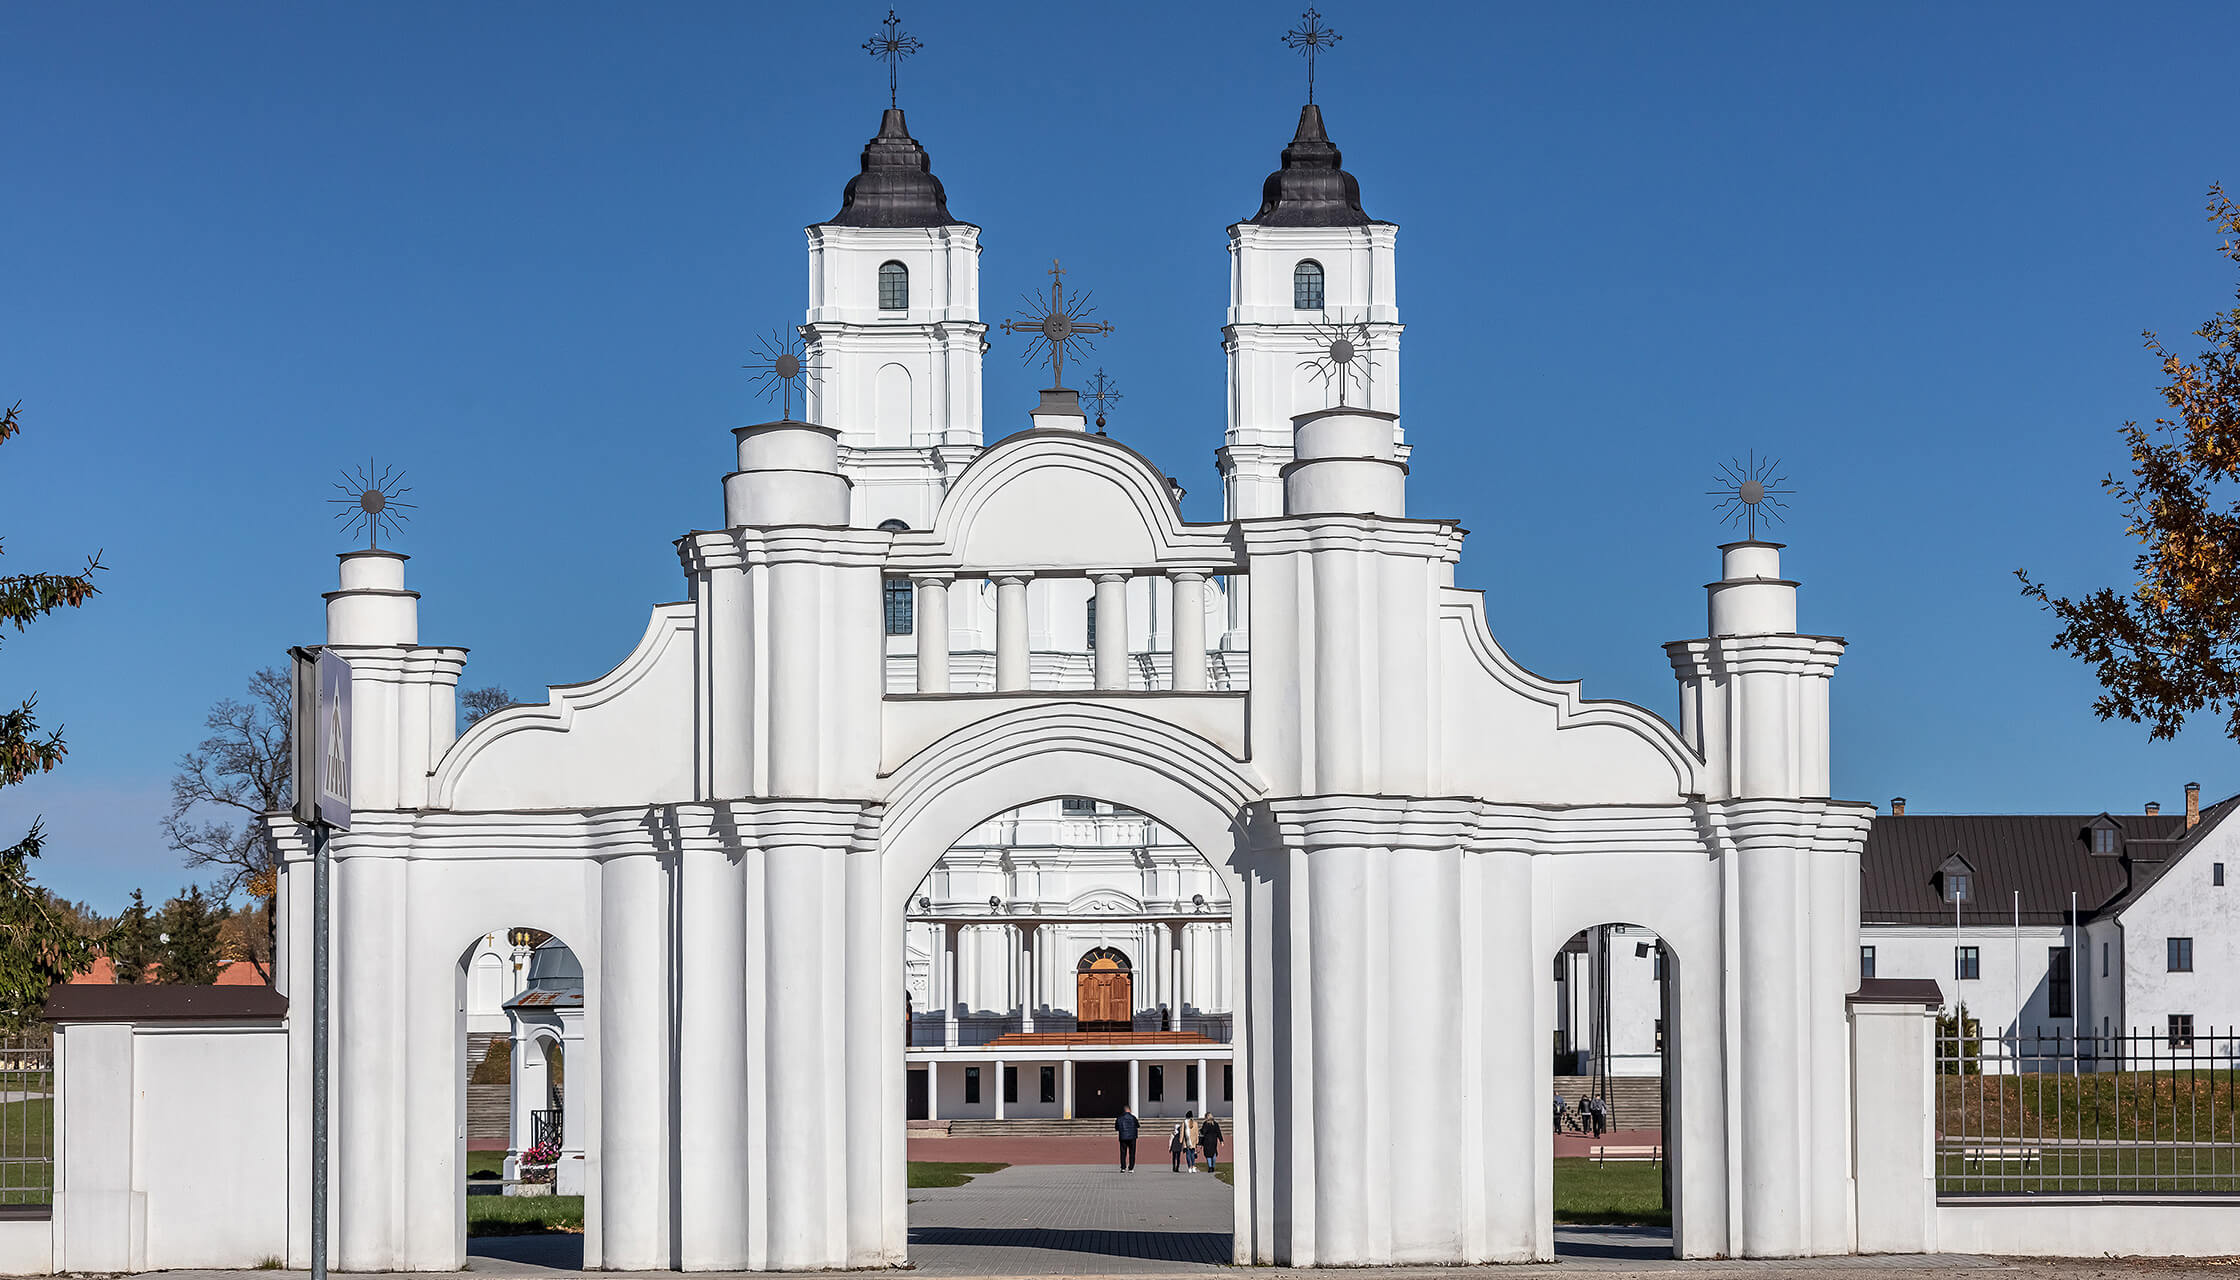 The Aglona Roman Catholic Basilica of the Assumption of the Blessed Virgin Mary is an important religious centre and a shrine of international importance